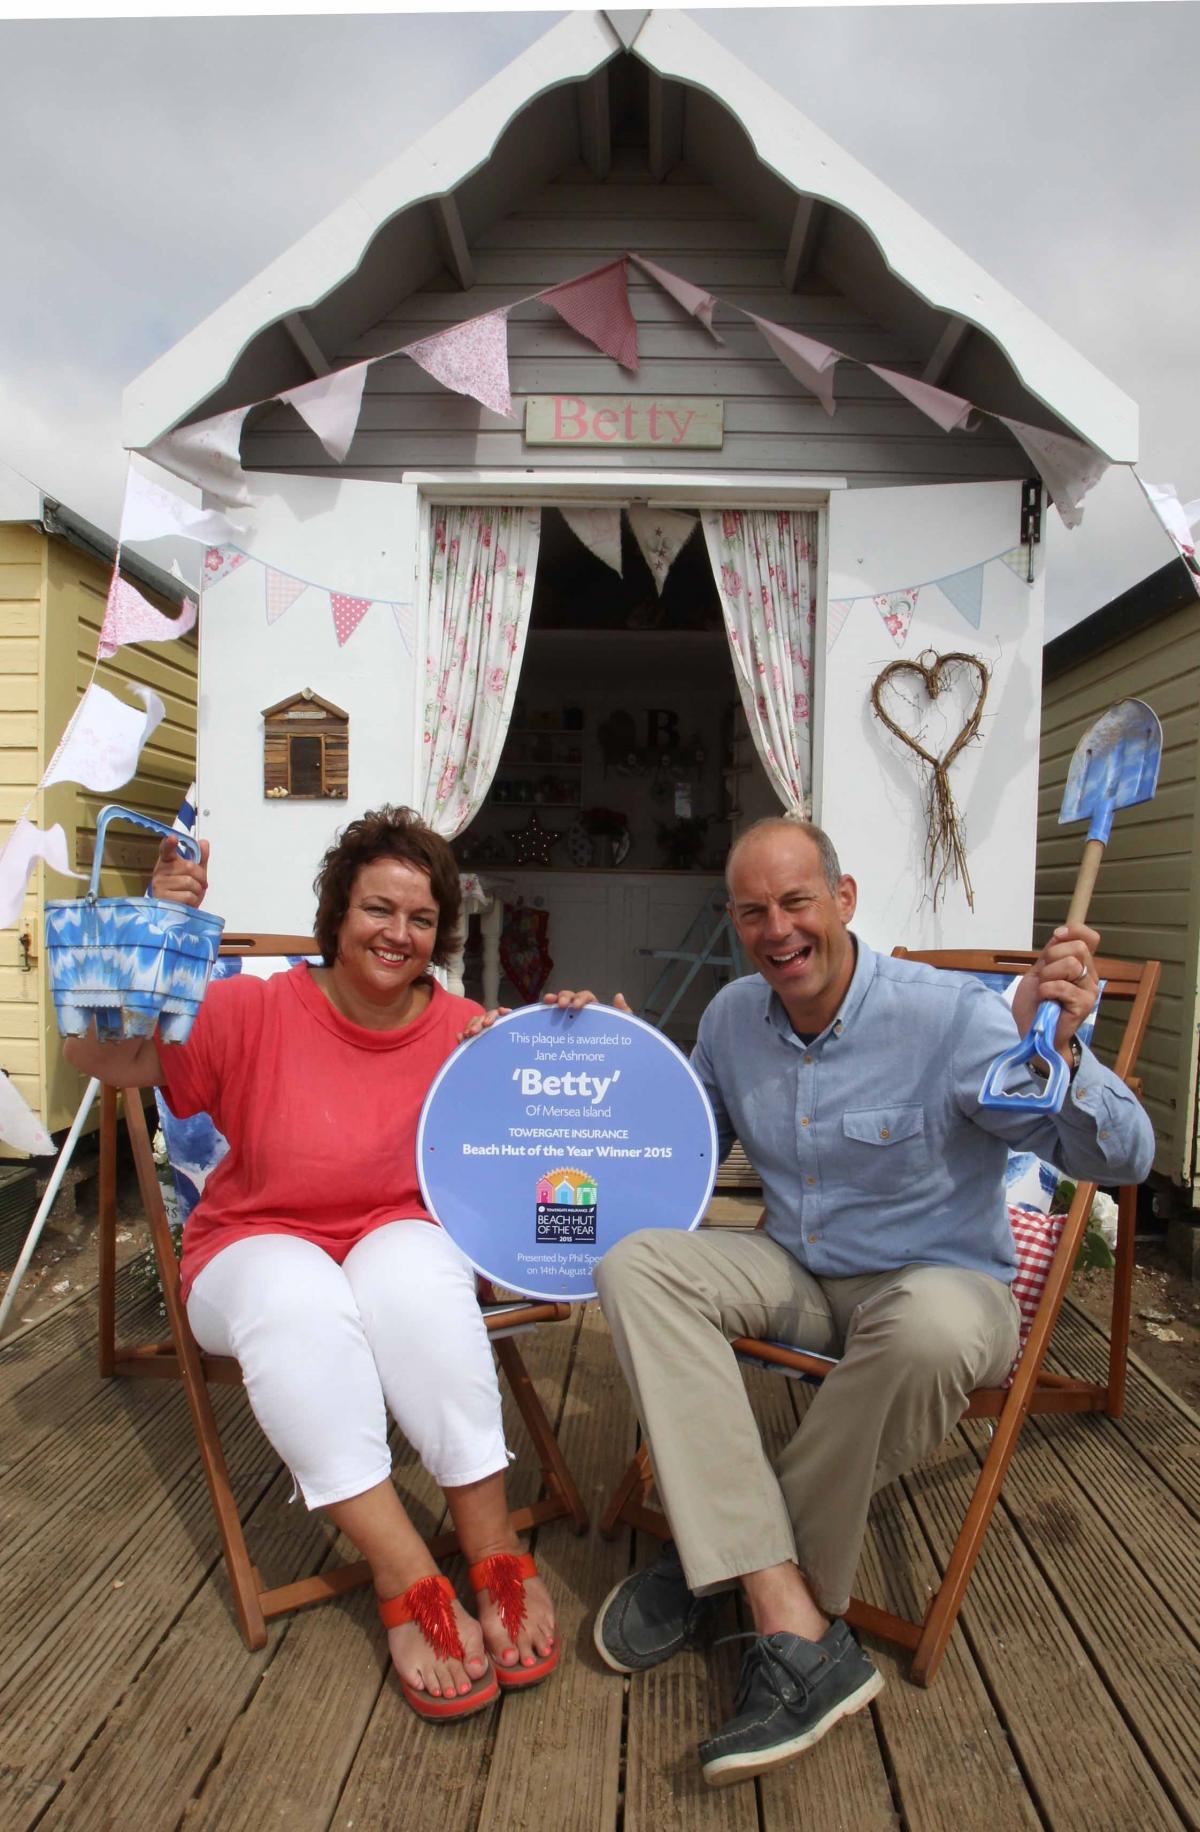 The Little Beach Company’s hut Betty, in Mersea, was named beach hut of the year. Here’s owner Jane Ashmore with TV presenter Phil Spencer.